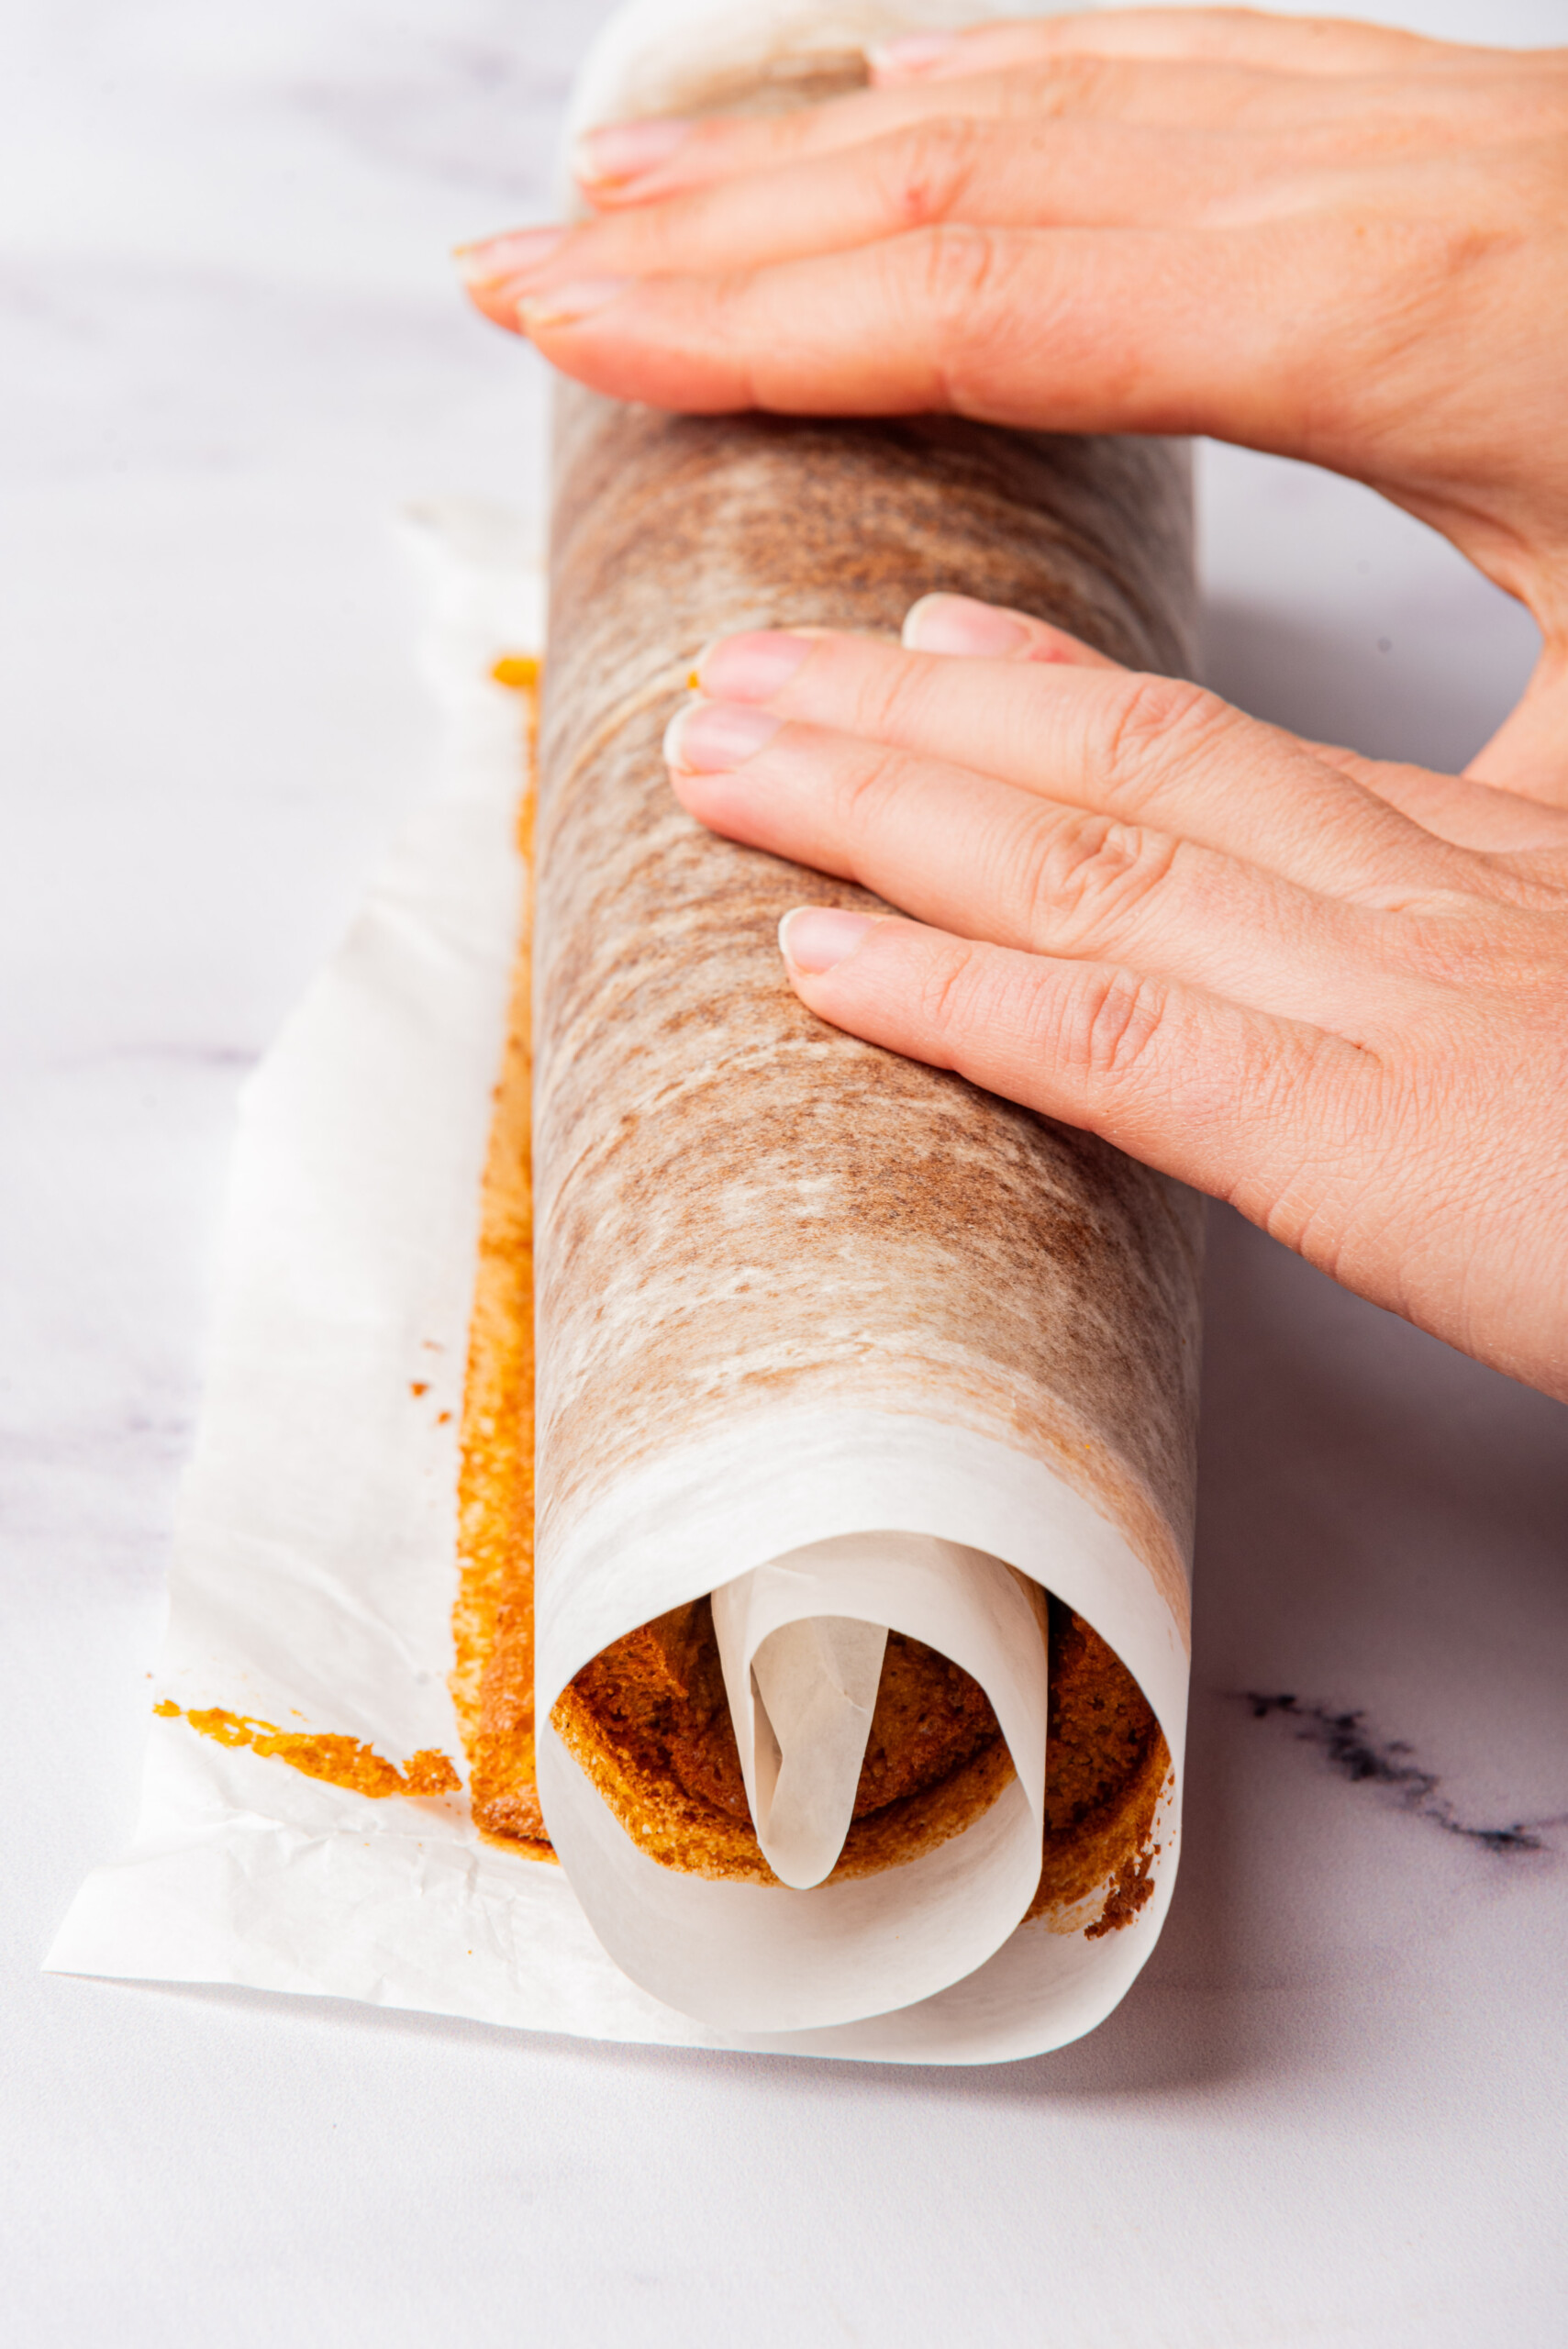 Hands rolling up the baked log cake with parchment paper.